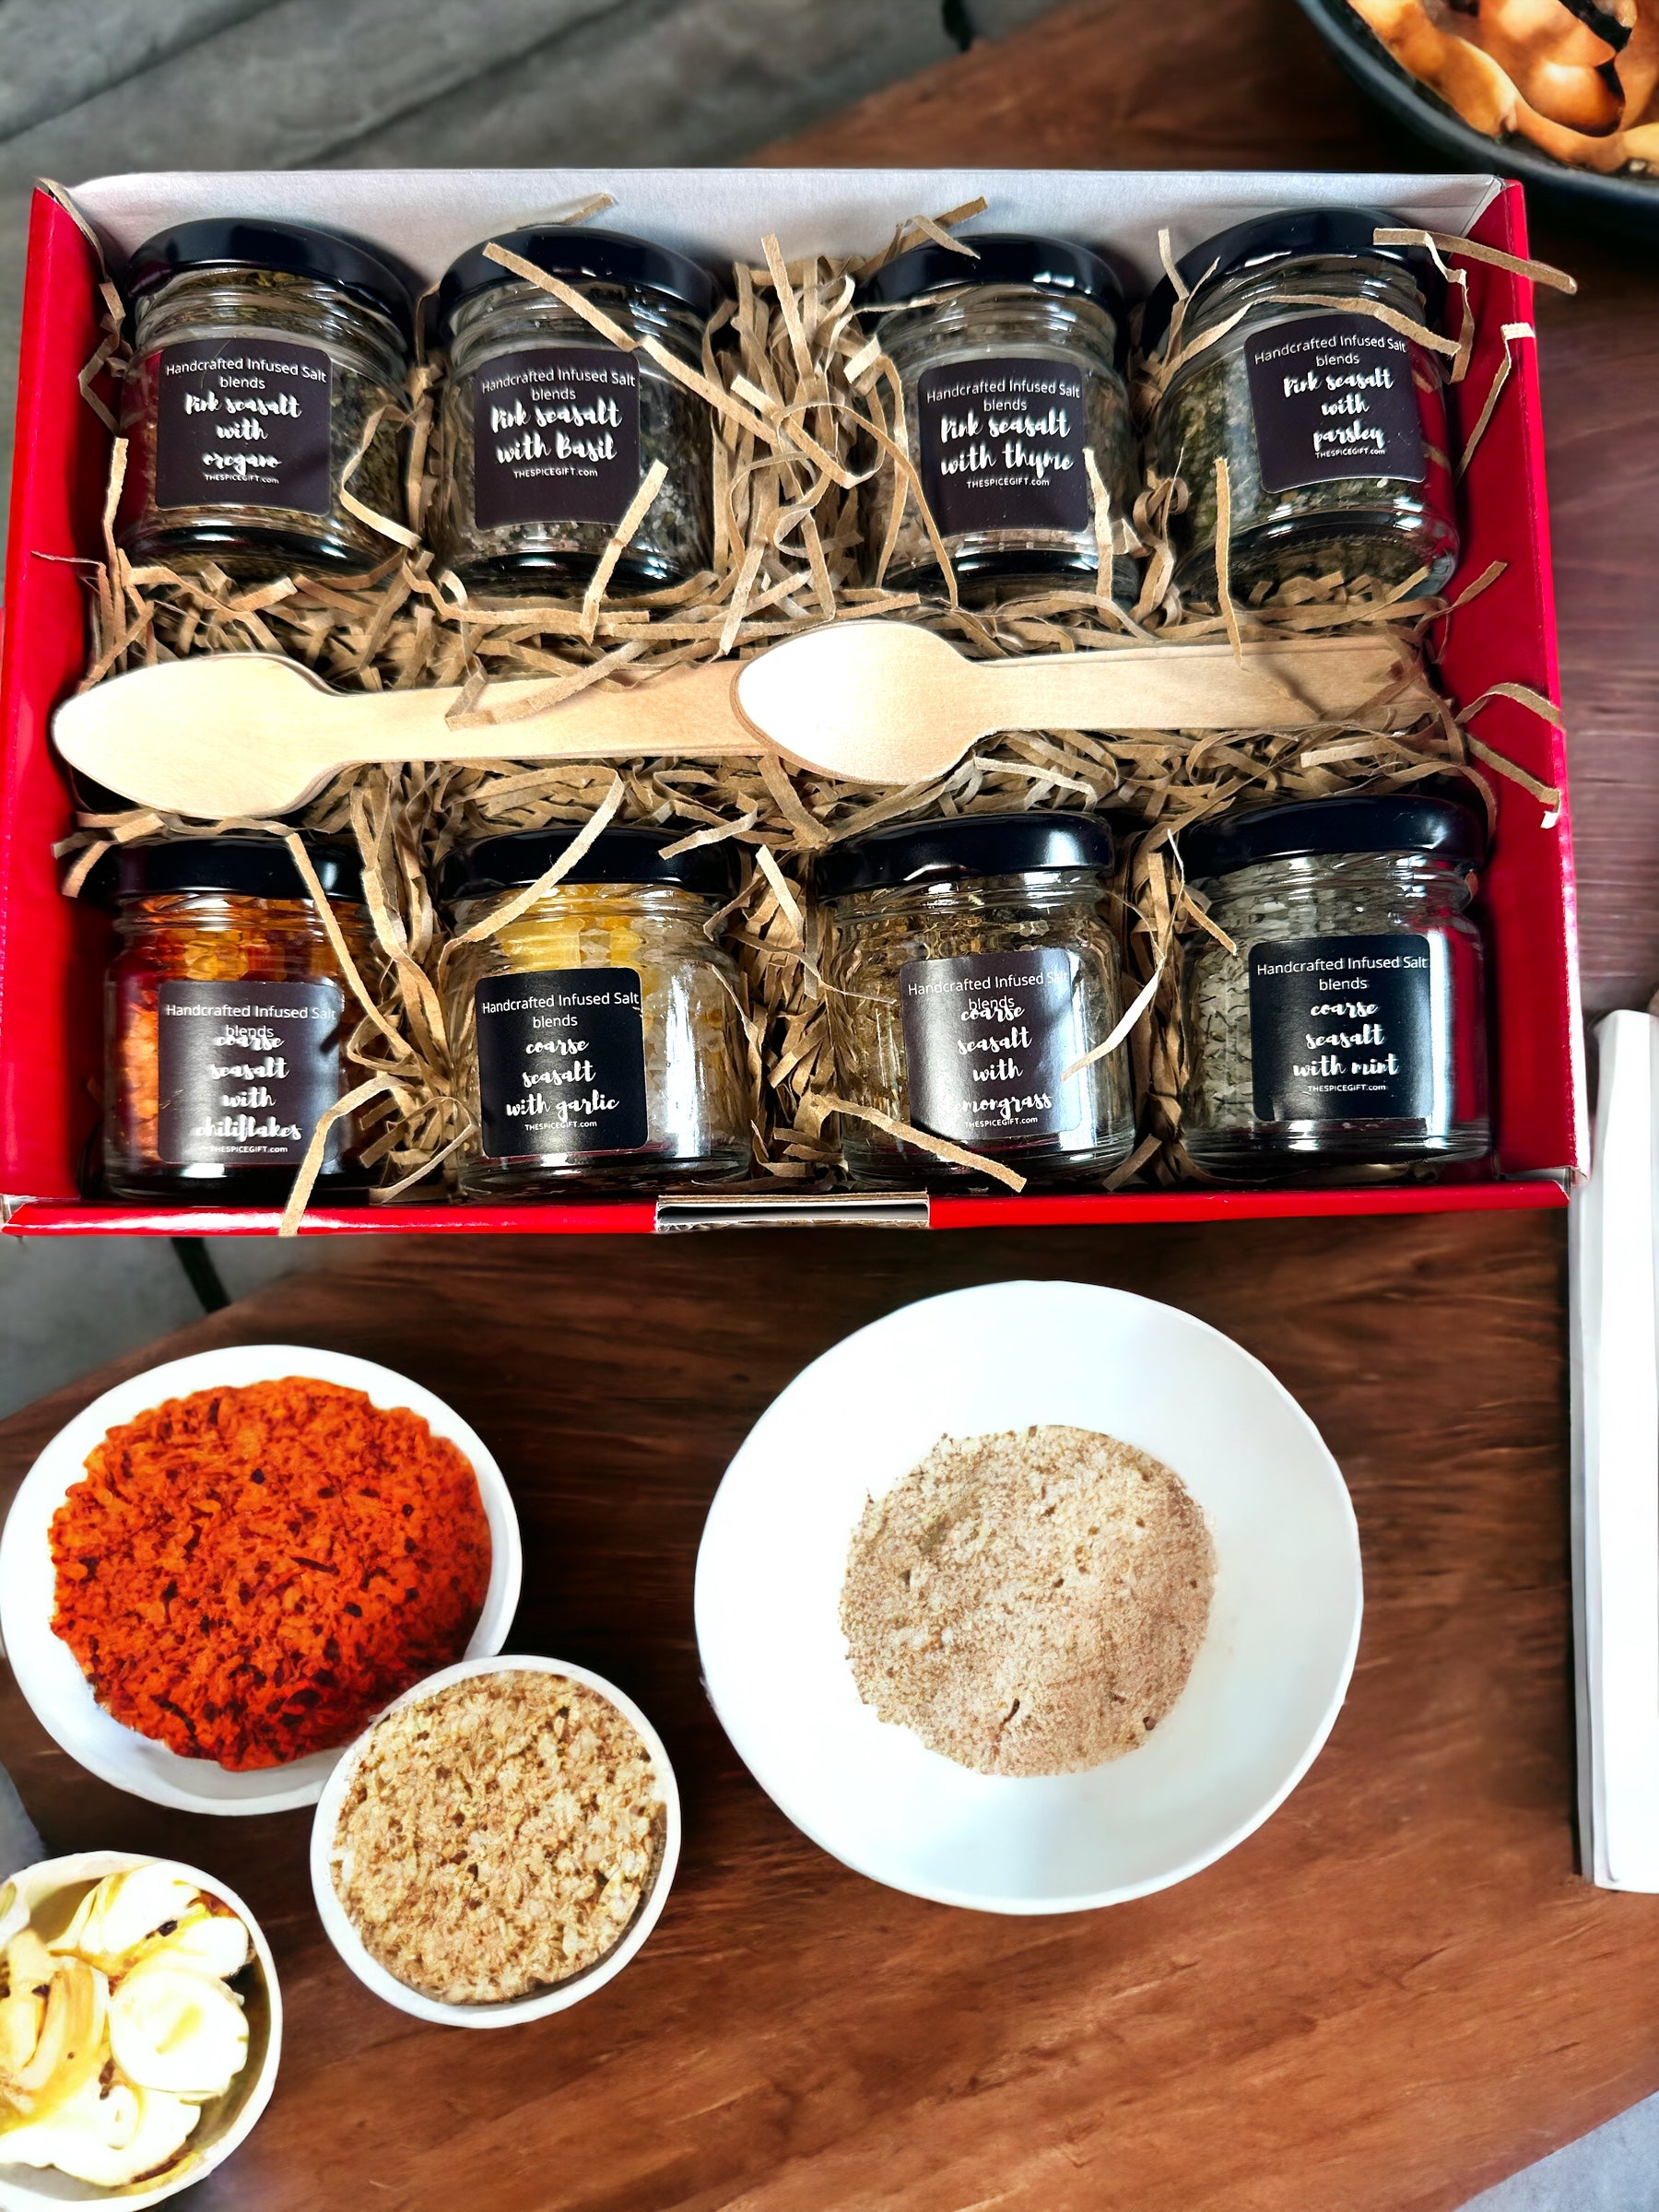 Best Spice Gift Sets for Foodies - Zest and Zing